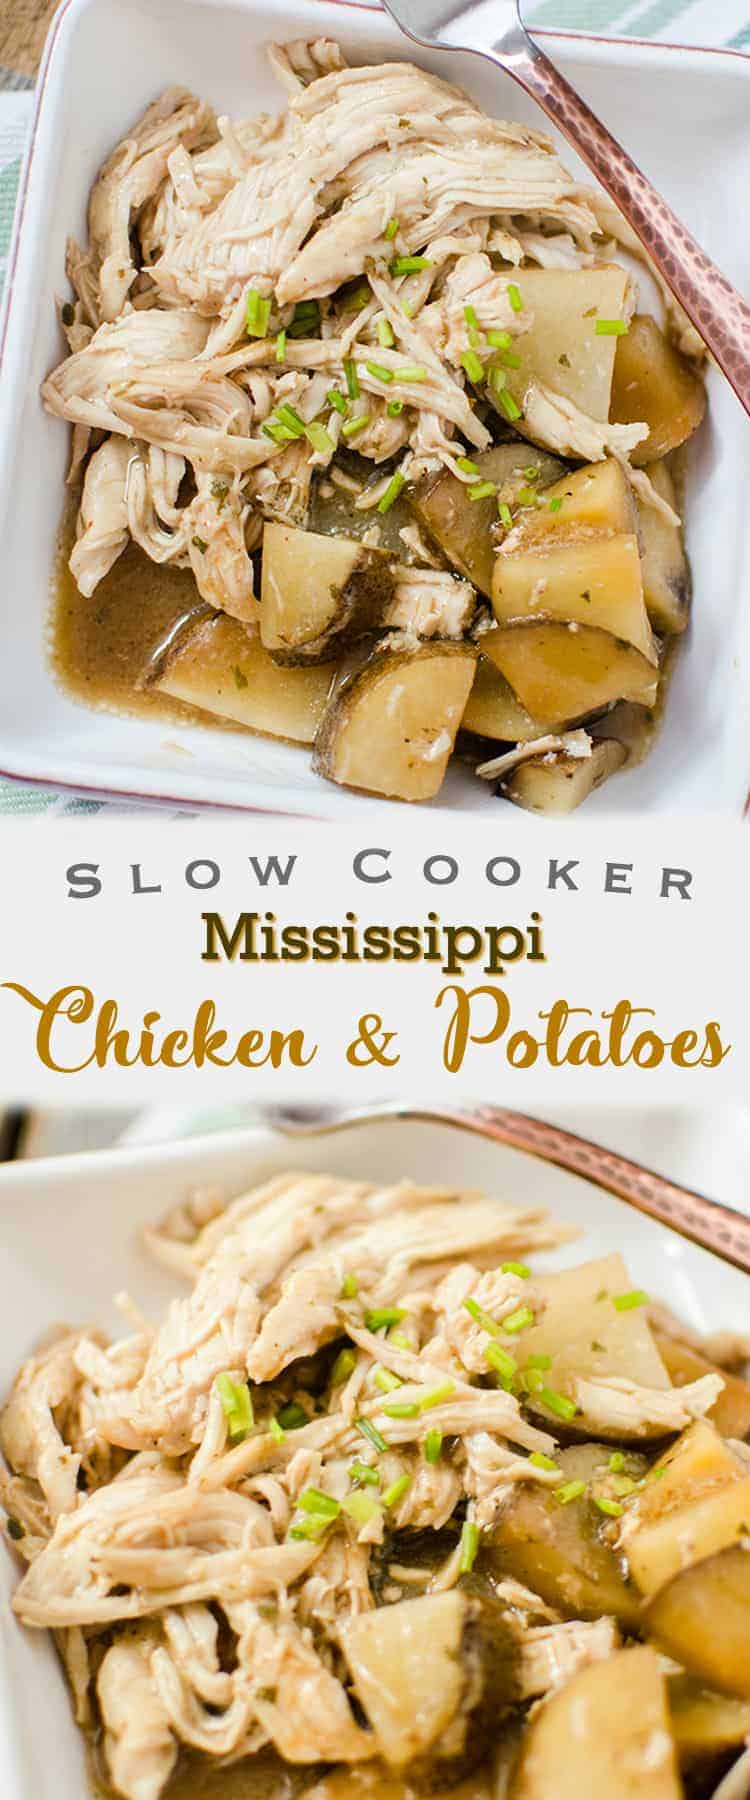 plate, with Slow Cooker and Mississippi Chicken